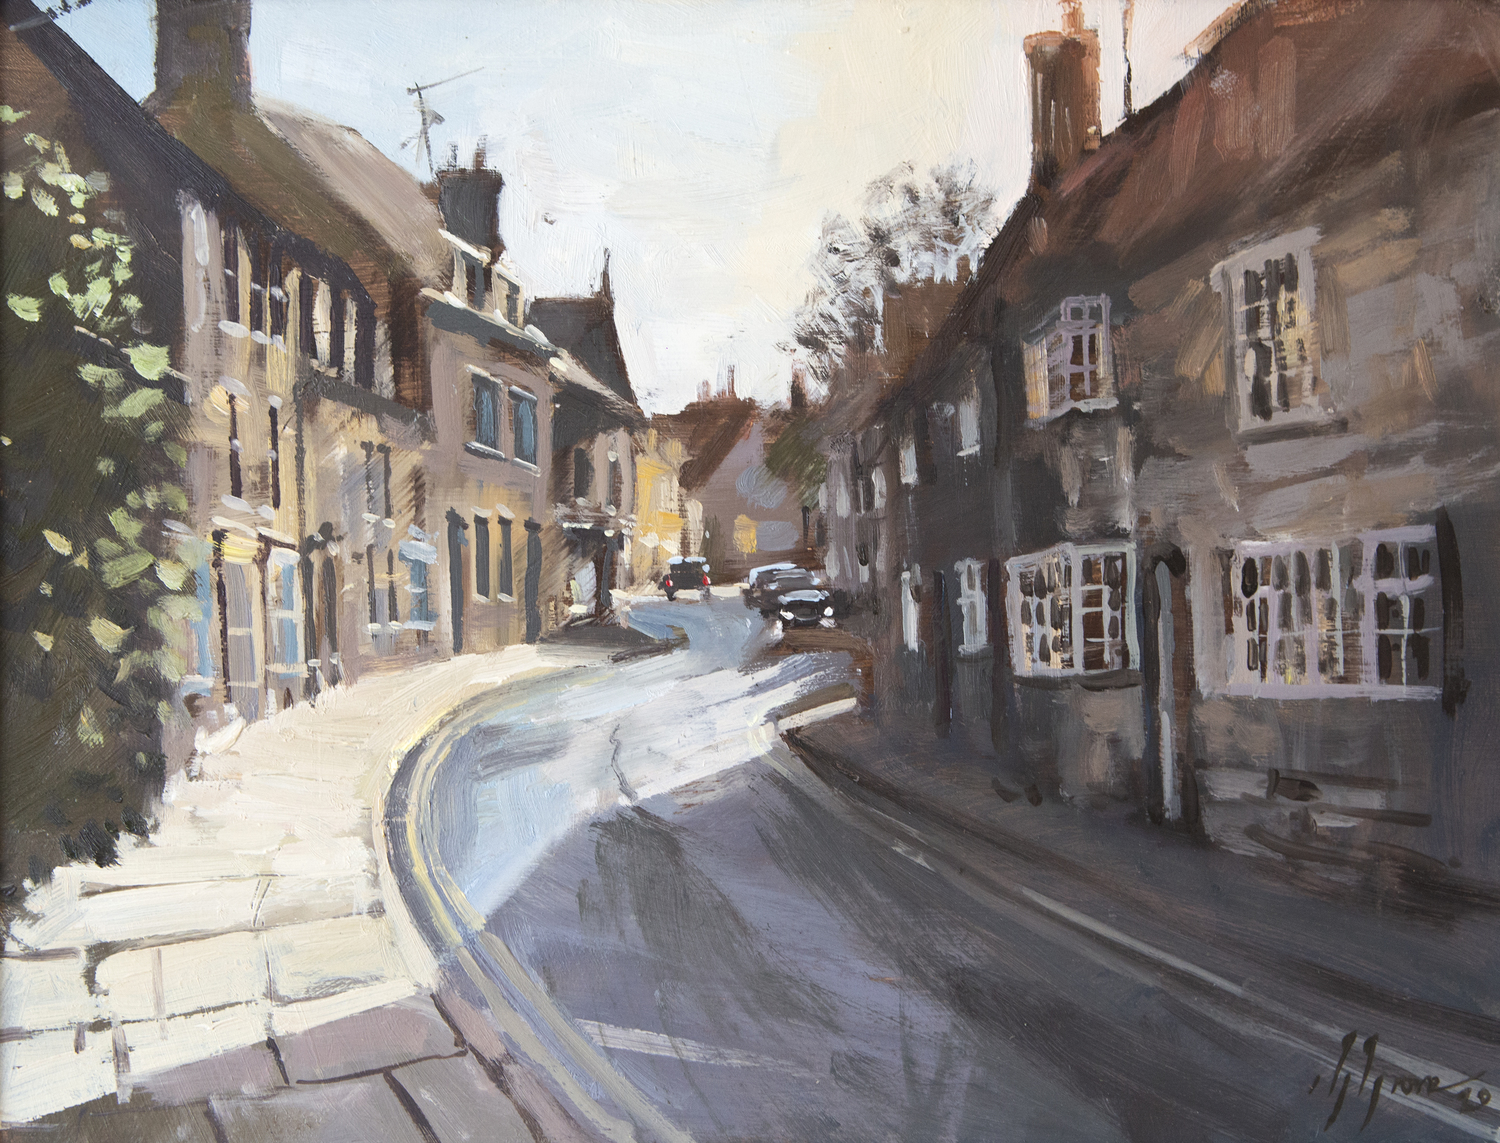 North St, Oundle